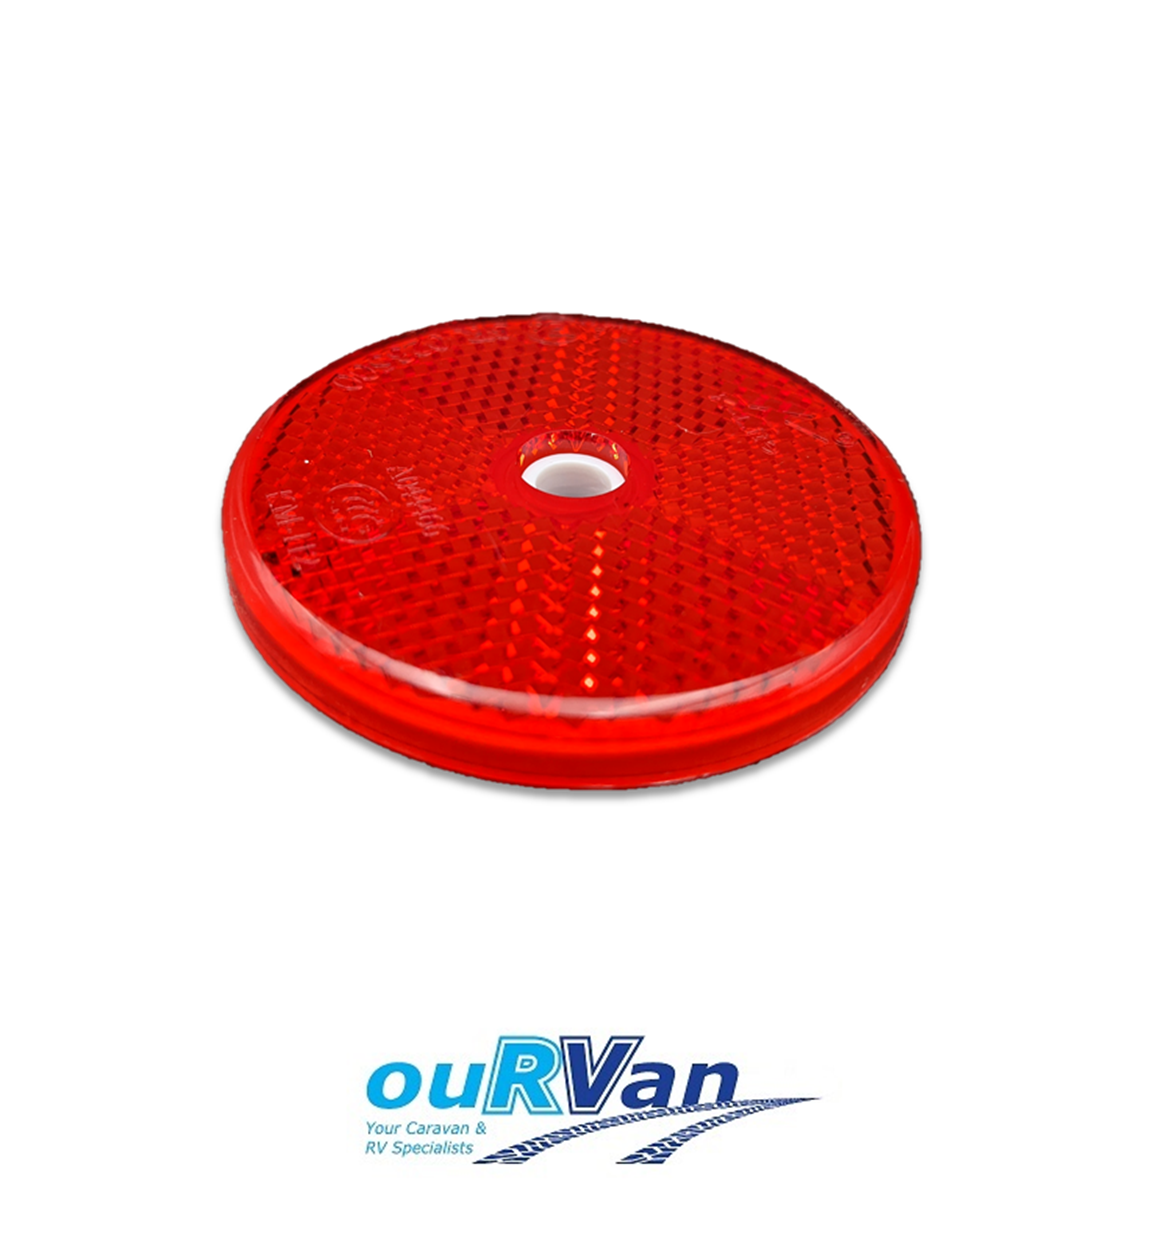 1 x 84012 EQUIVALENT 60mm DIAMETER RED SELF ADHESIVE REFLECTOR